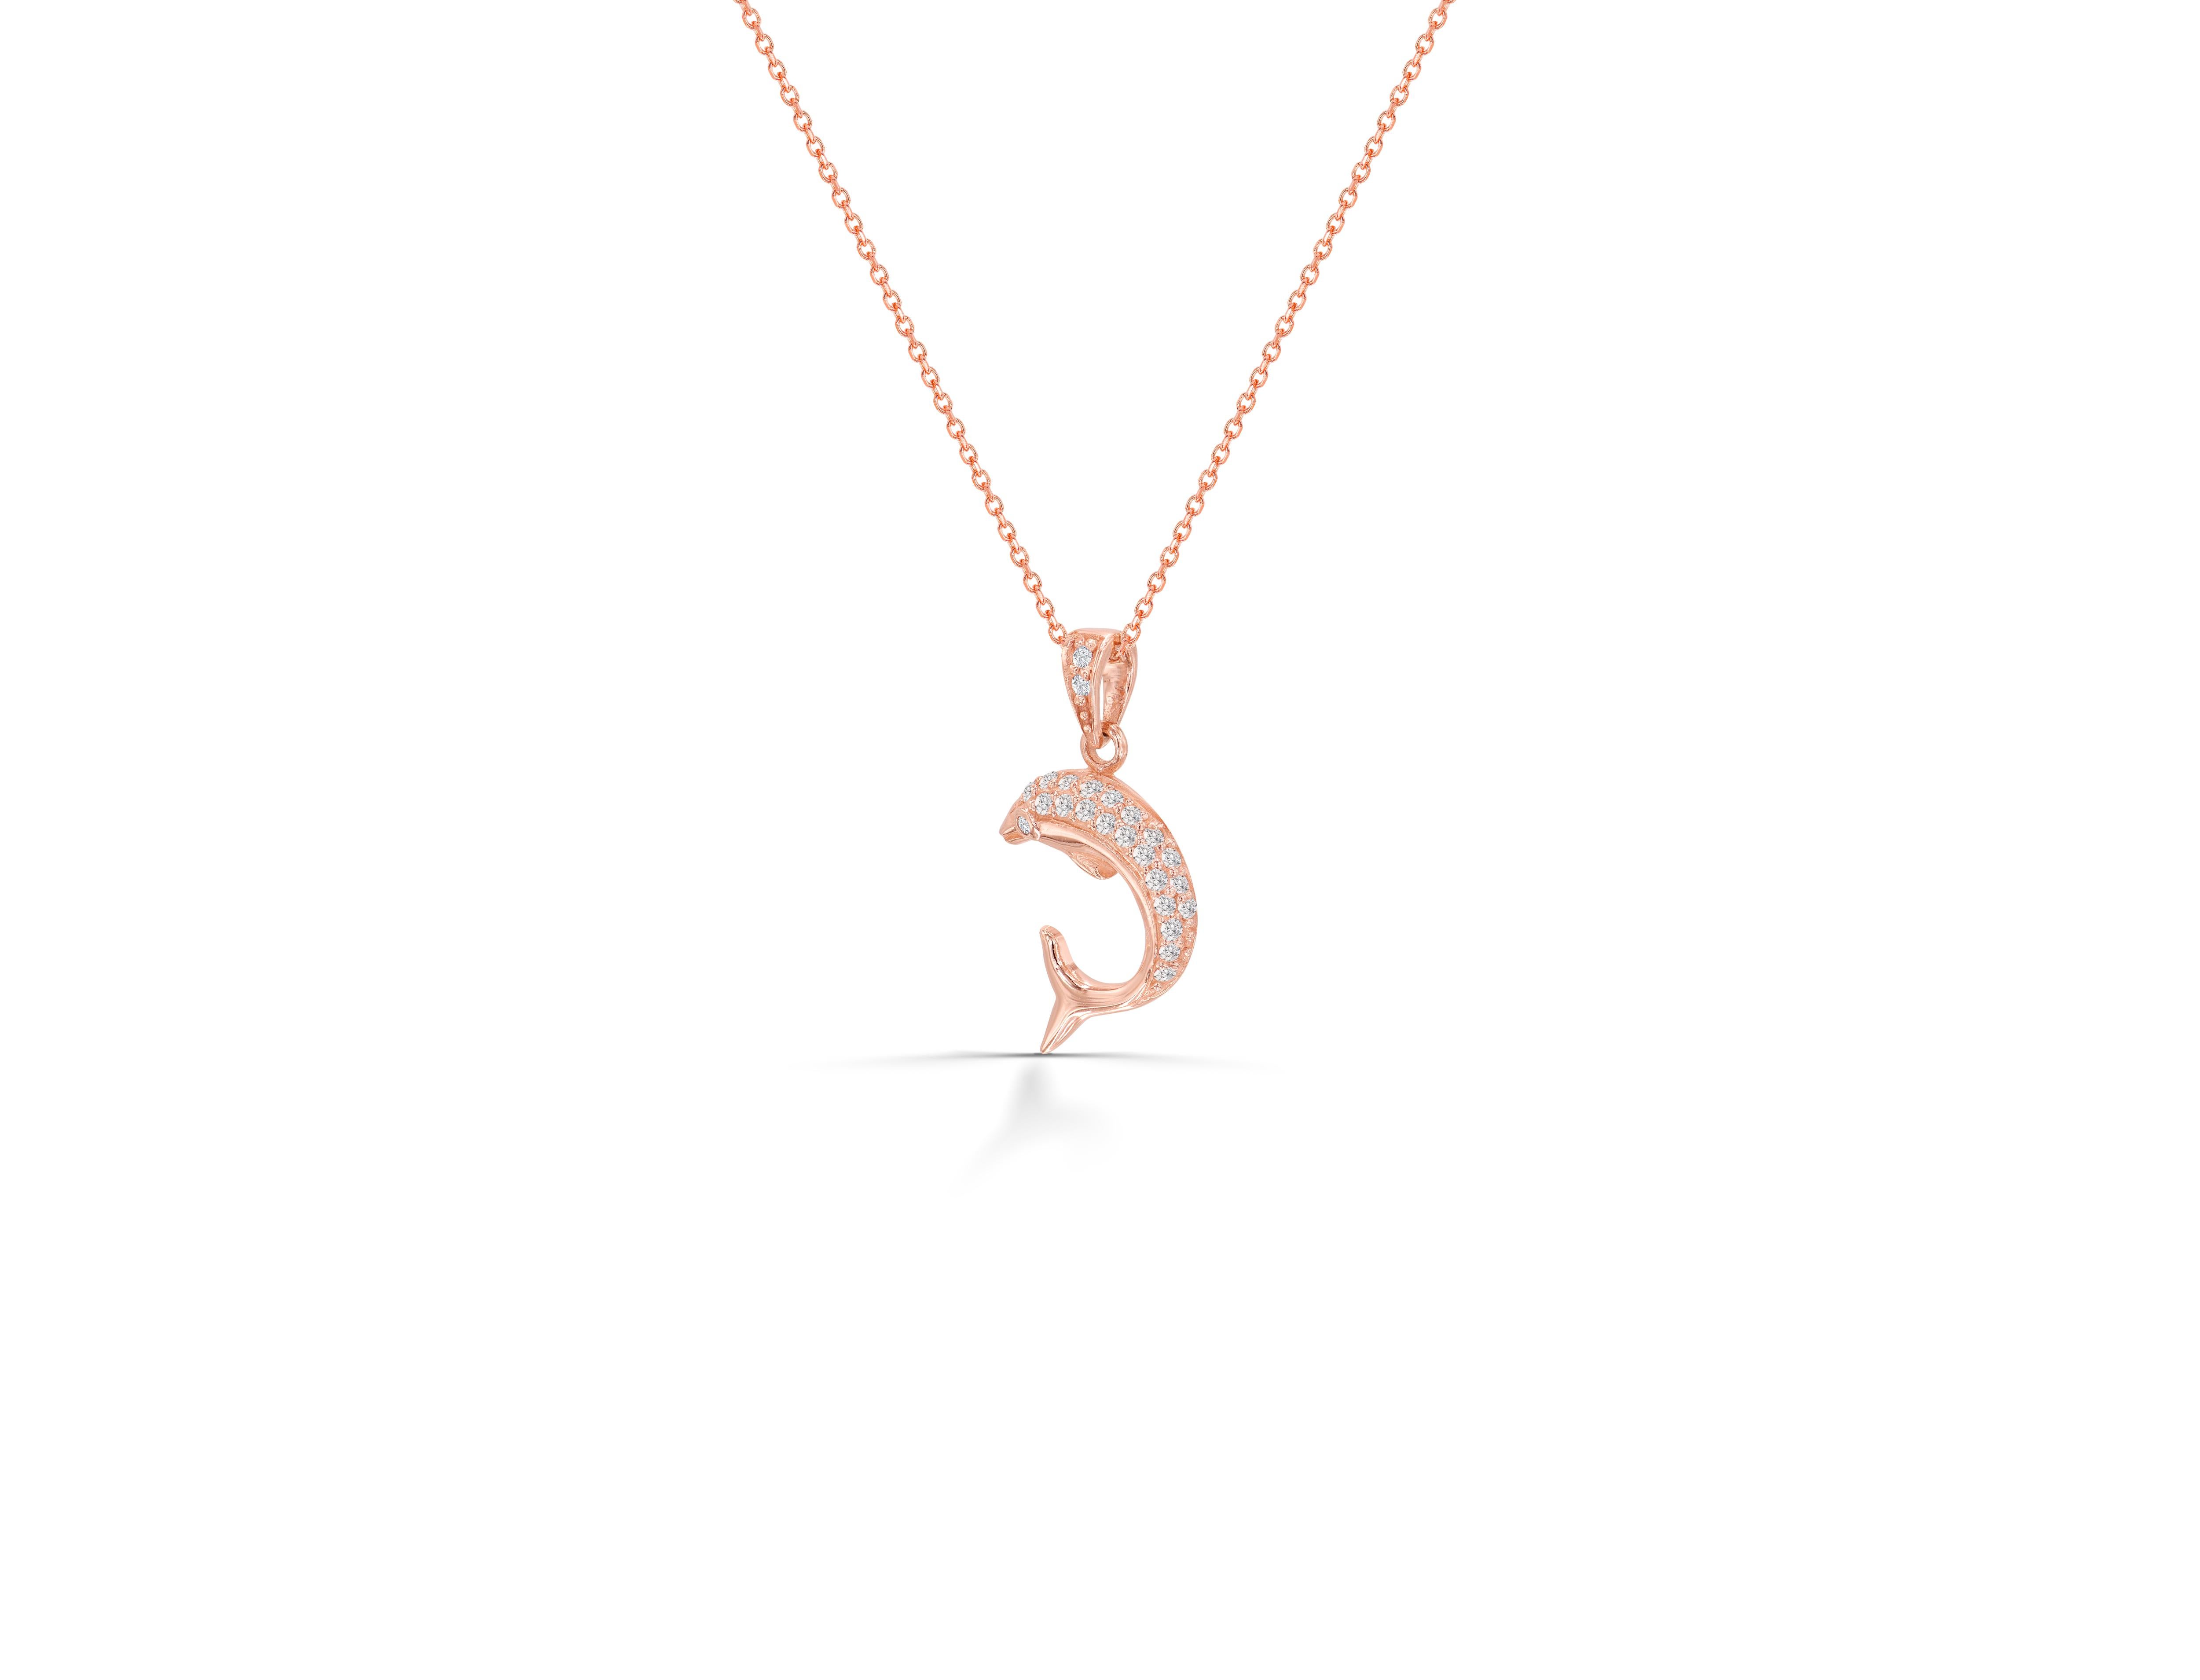 Delicate dainty dolphin charm necklace with a natural diamond is made of 14k solid gold.
Available in three colors of gold:  White Gold / Rose  Gold / Yellow Gold.

Lightweight and gorgeous natural genuine round cut diamond. Each diamond is hand